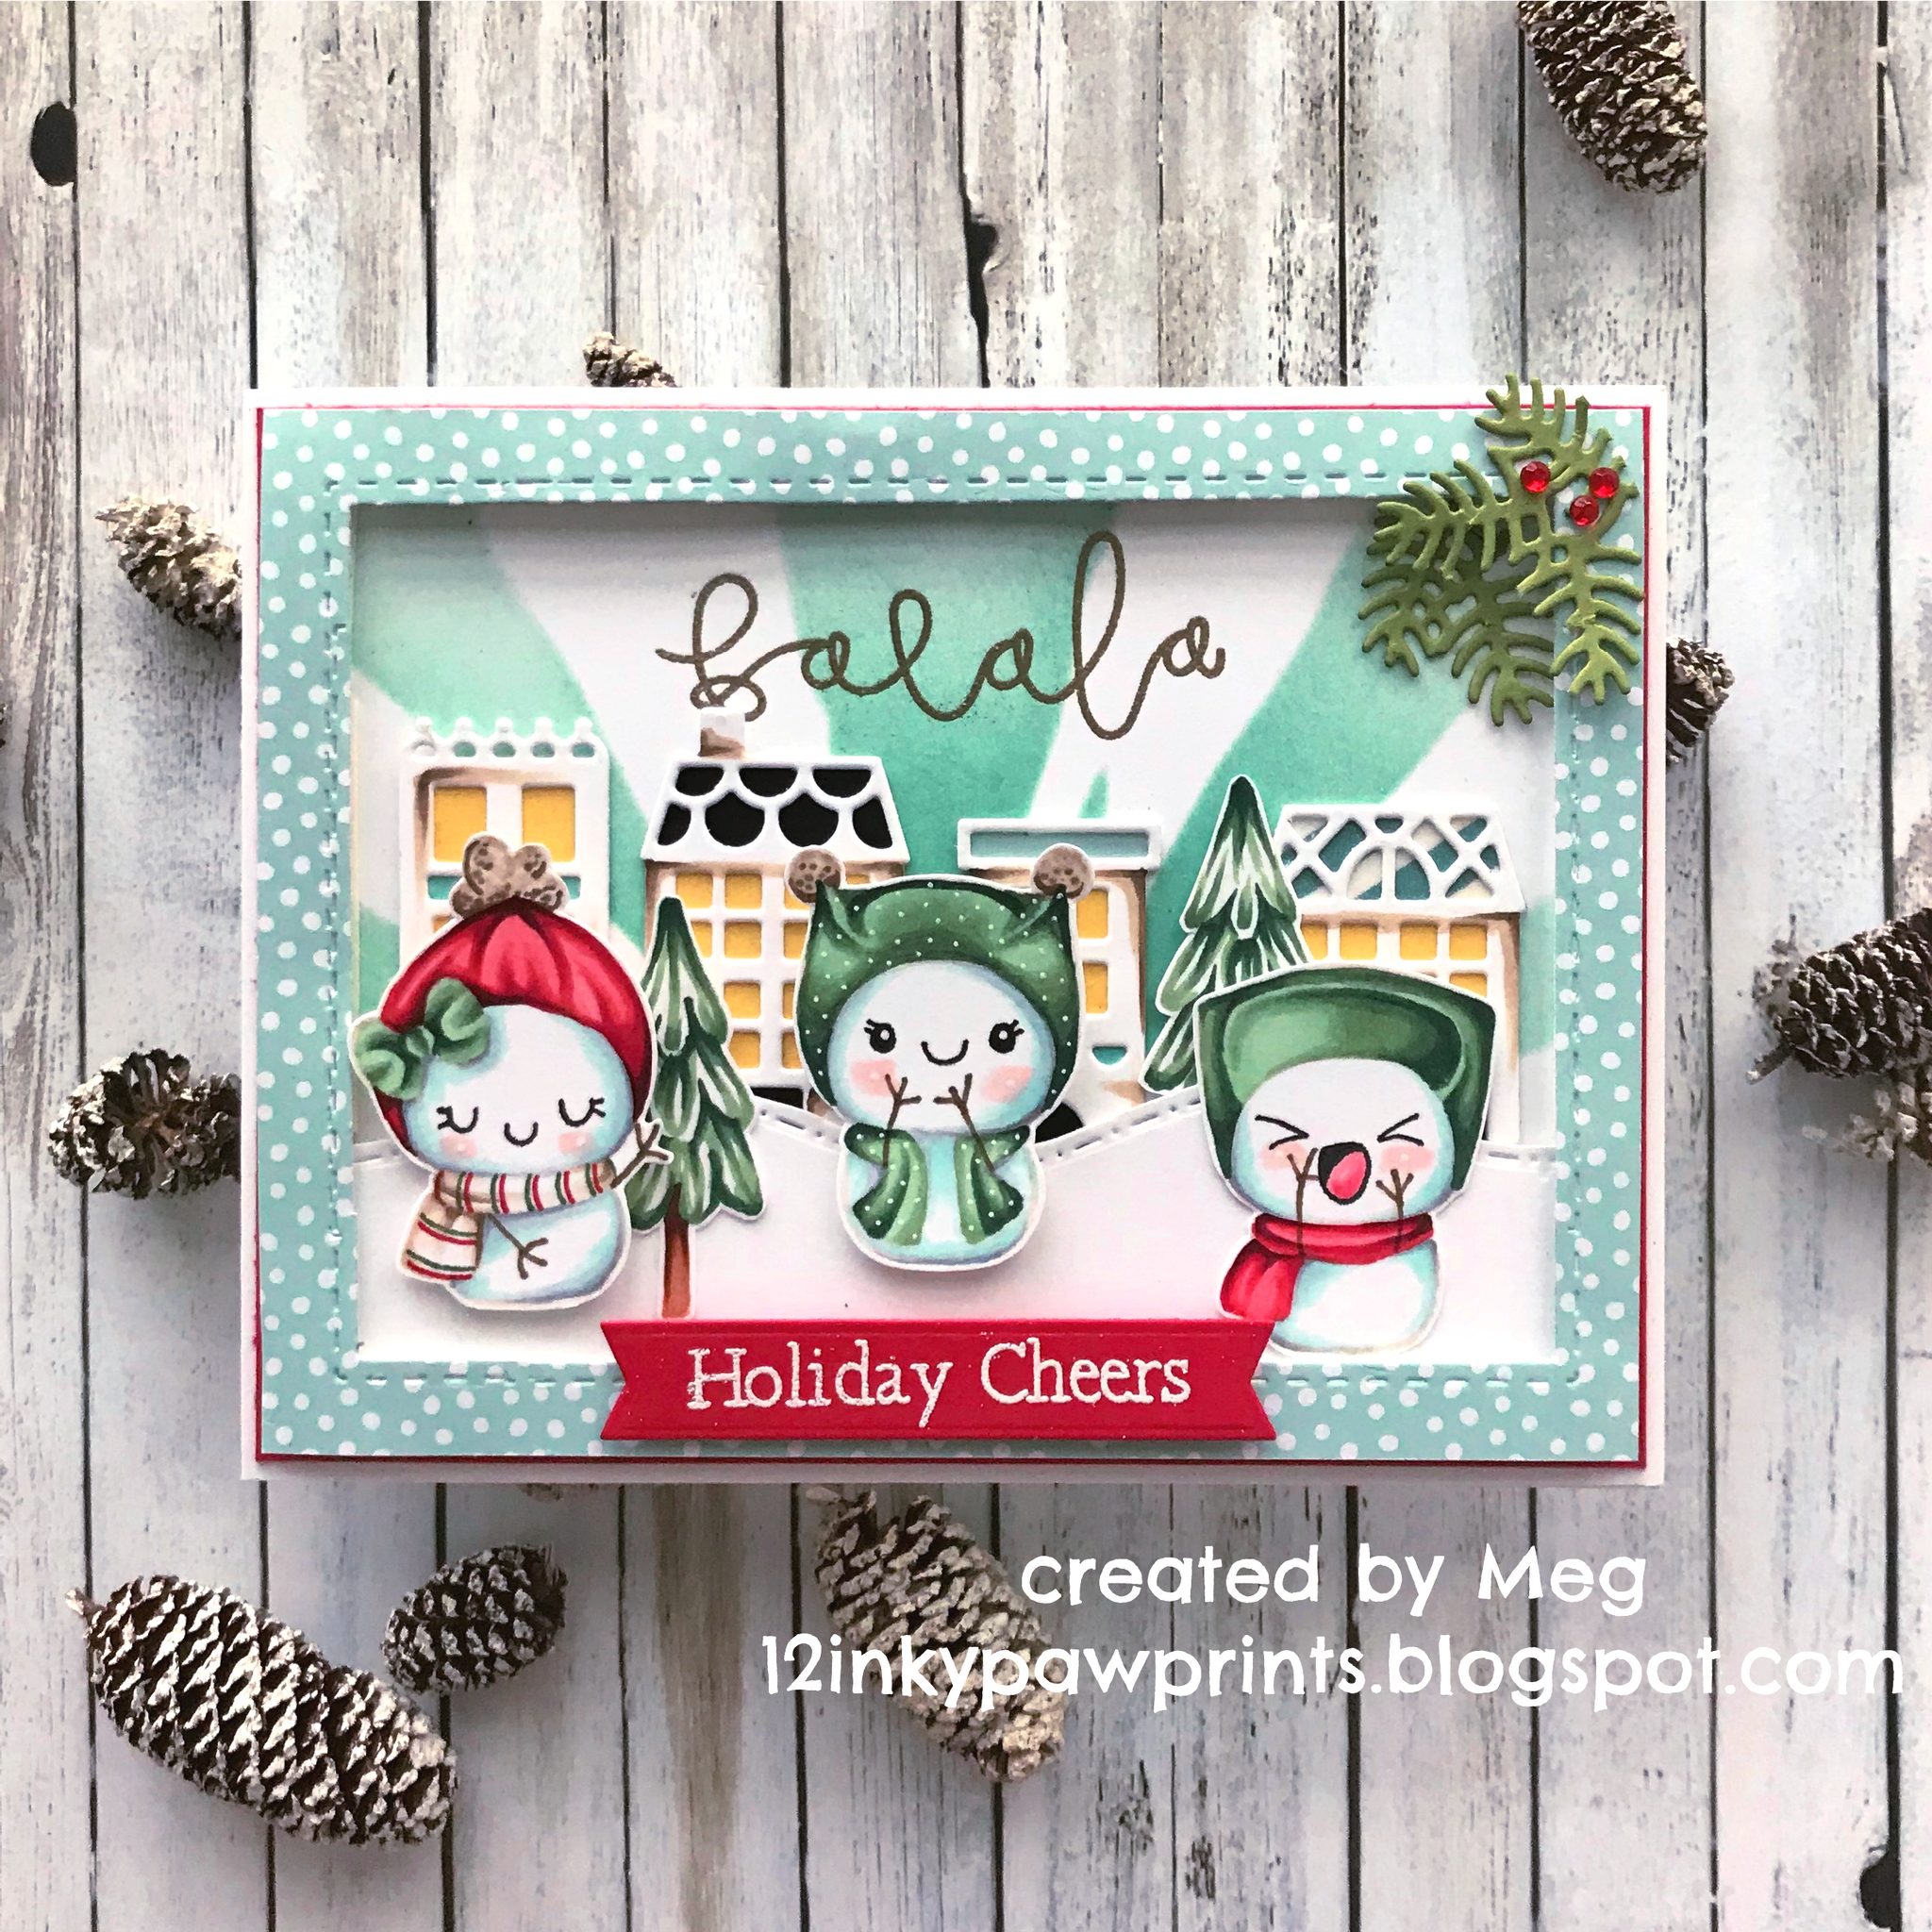 Guest Designer Meg Russell wishing you Holiday Cheers!